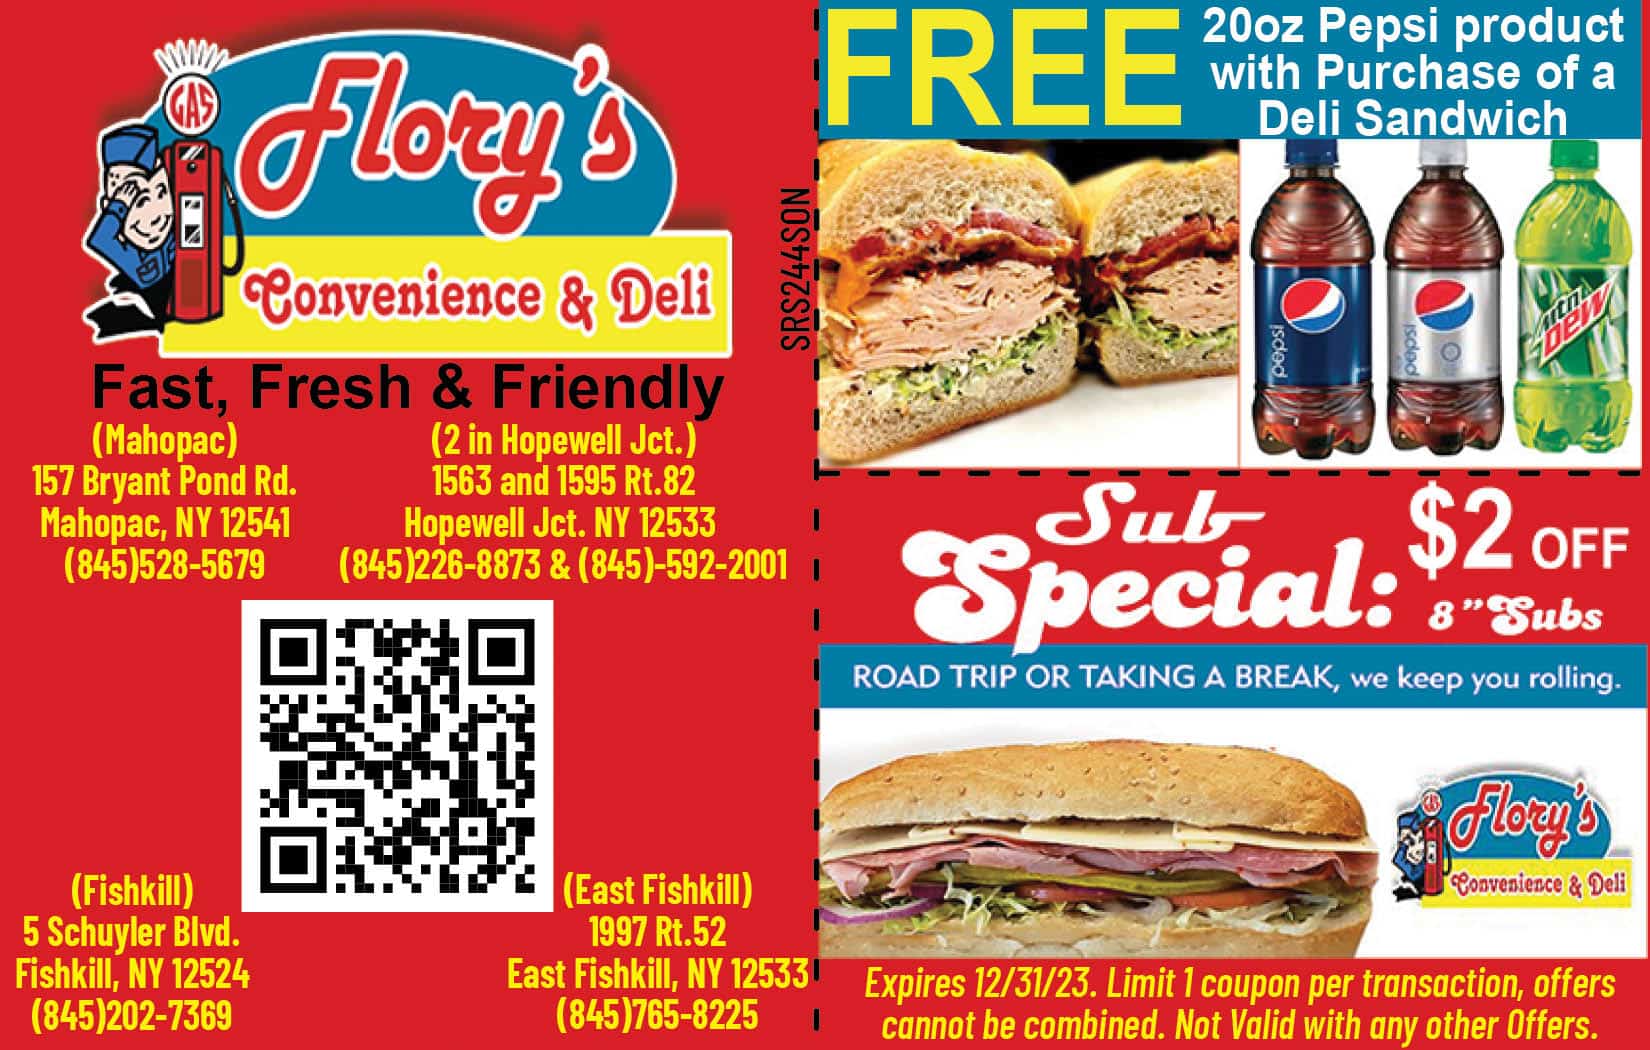 Flory’s Convenience and Deli